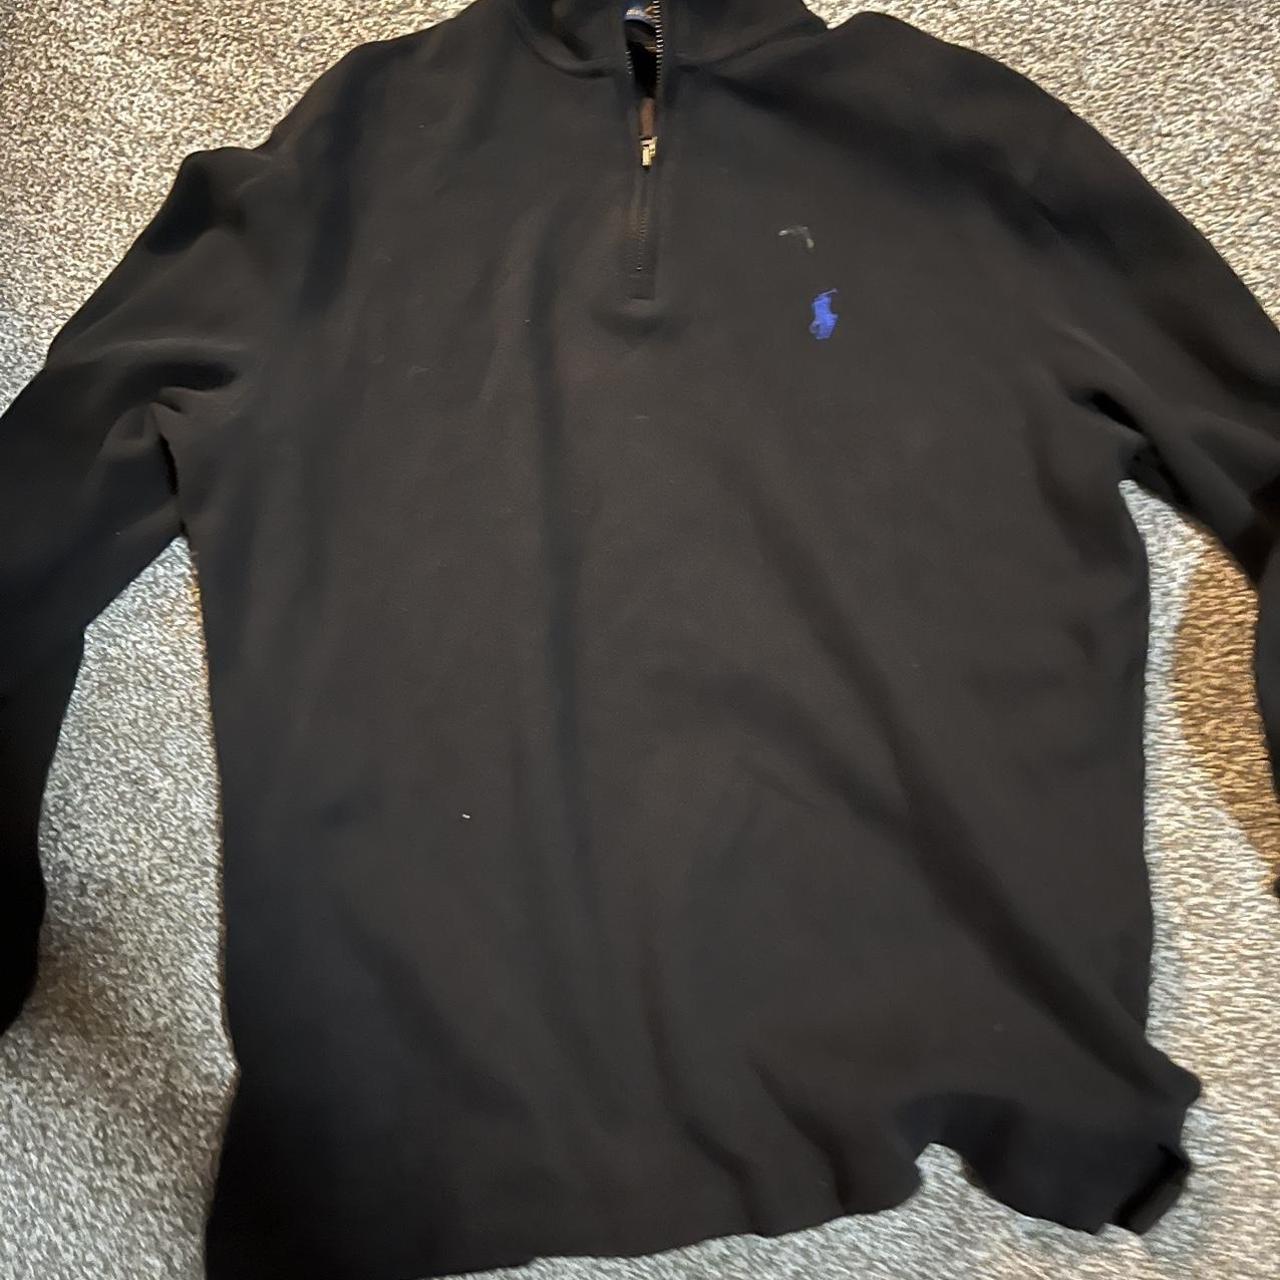 polo quarter zip size s fits small - Depop